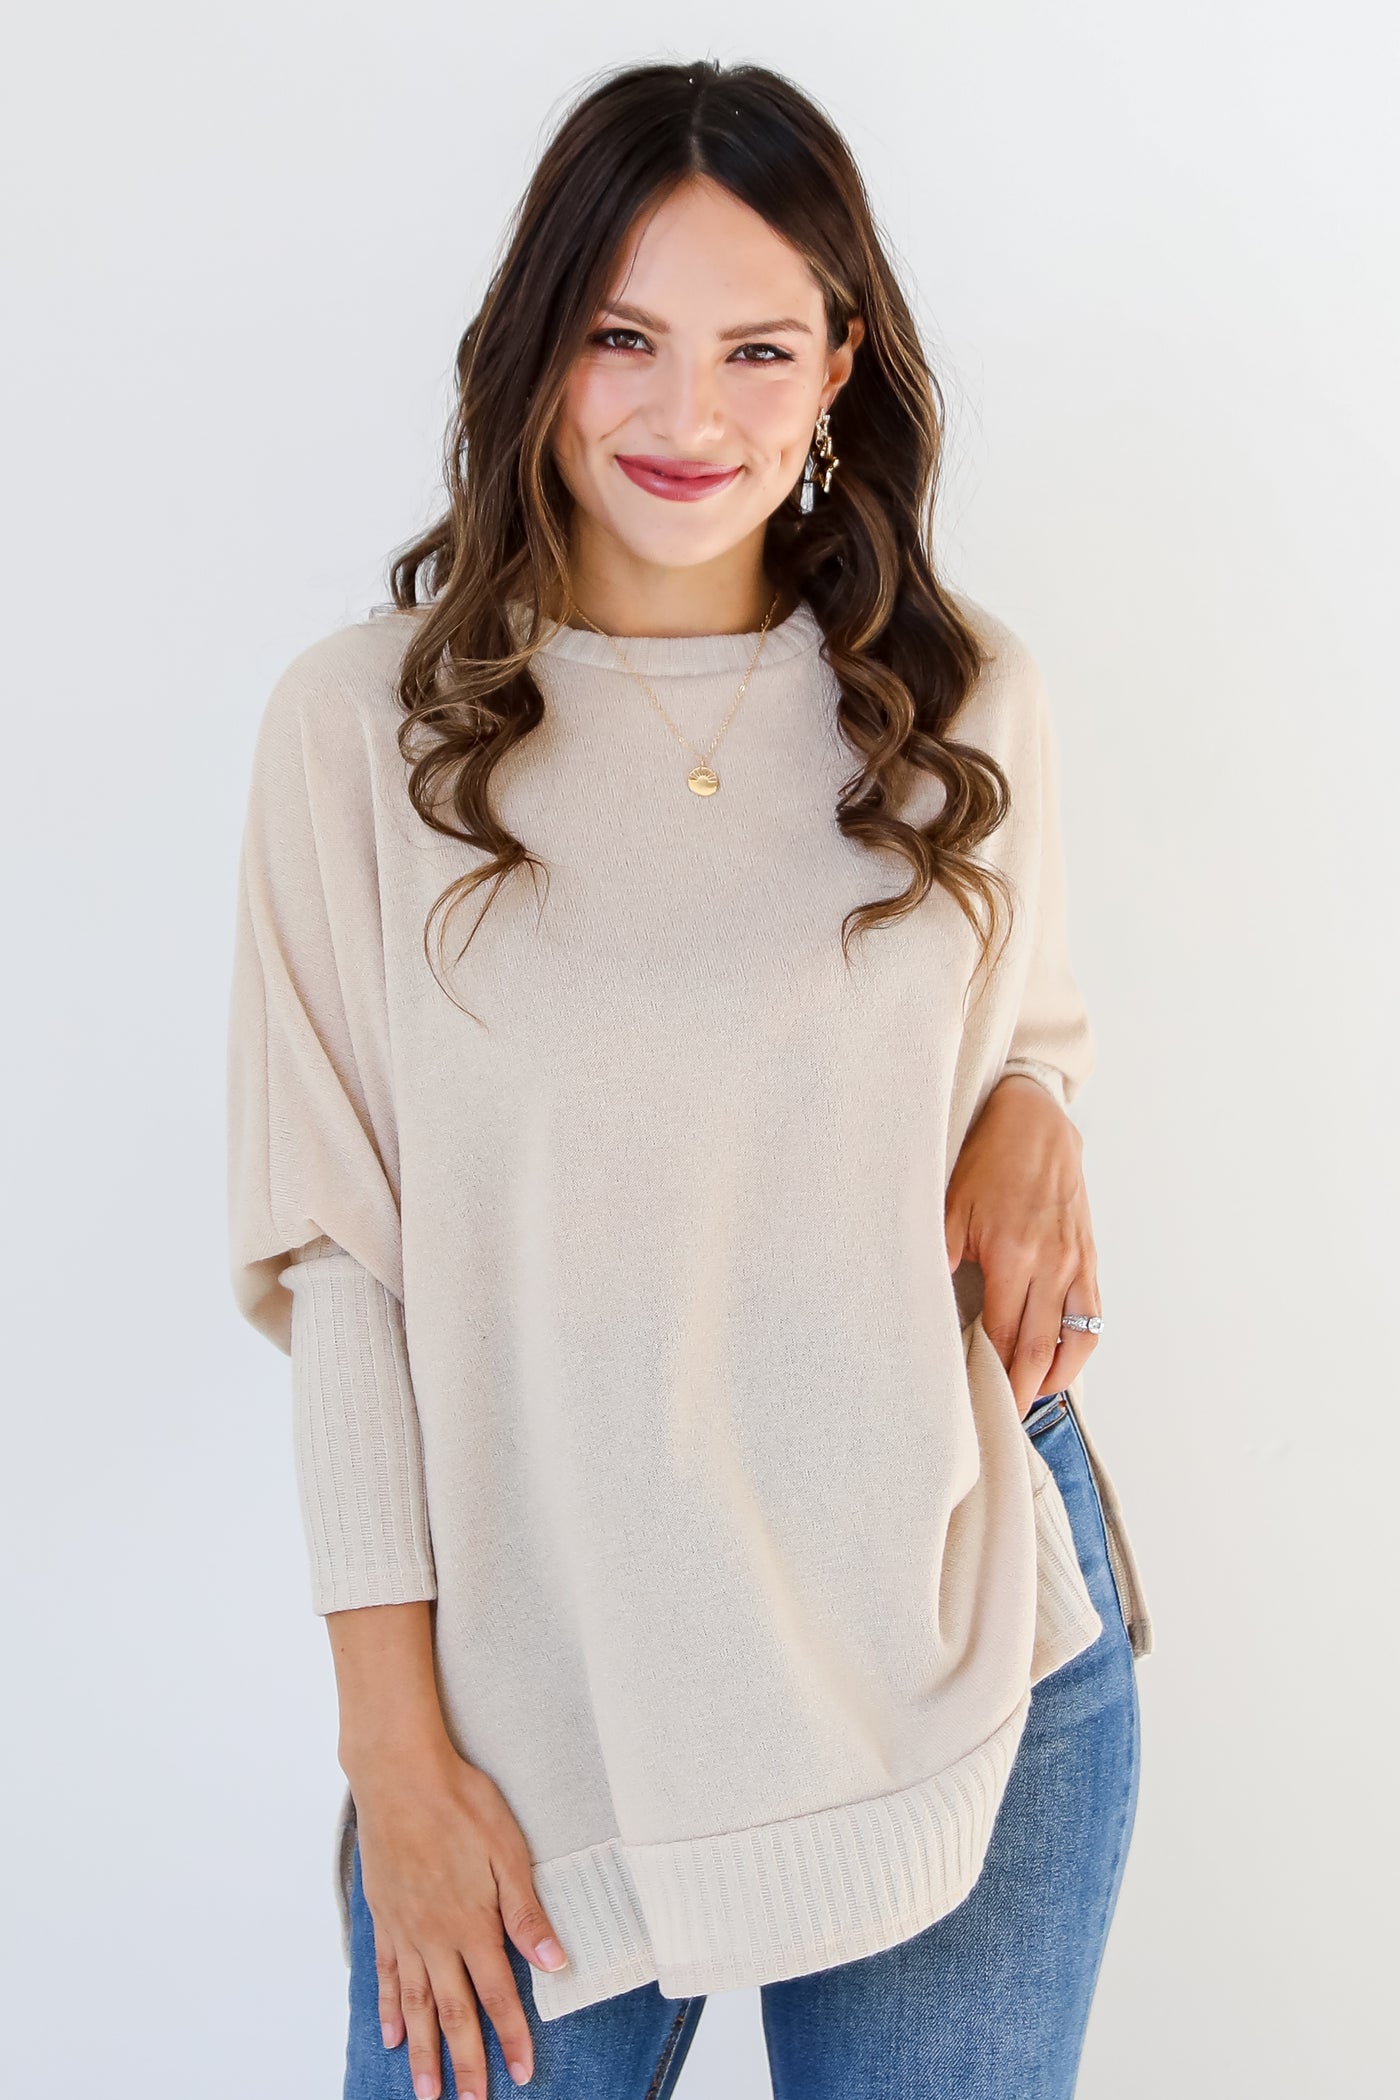 ivory Knit Top